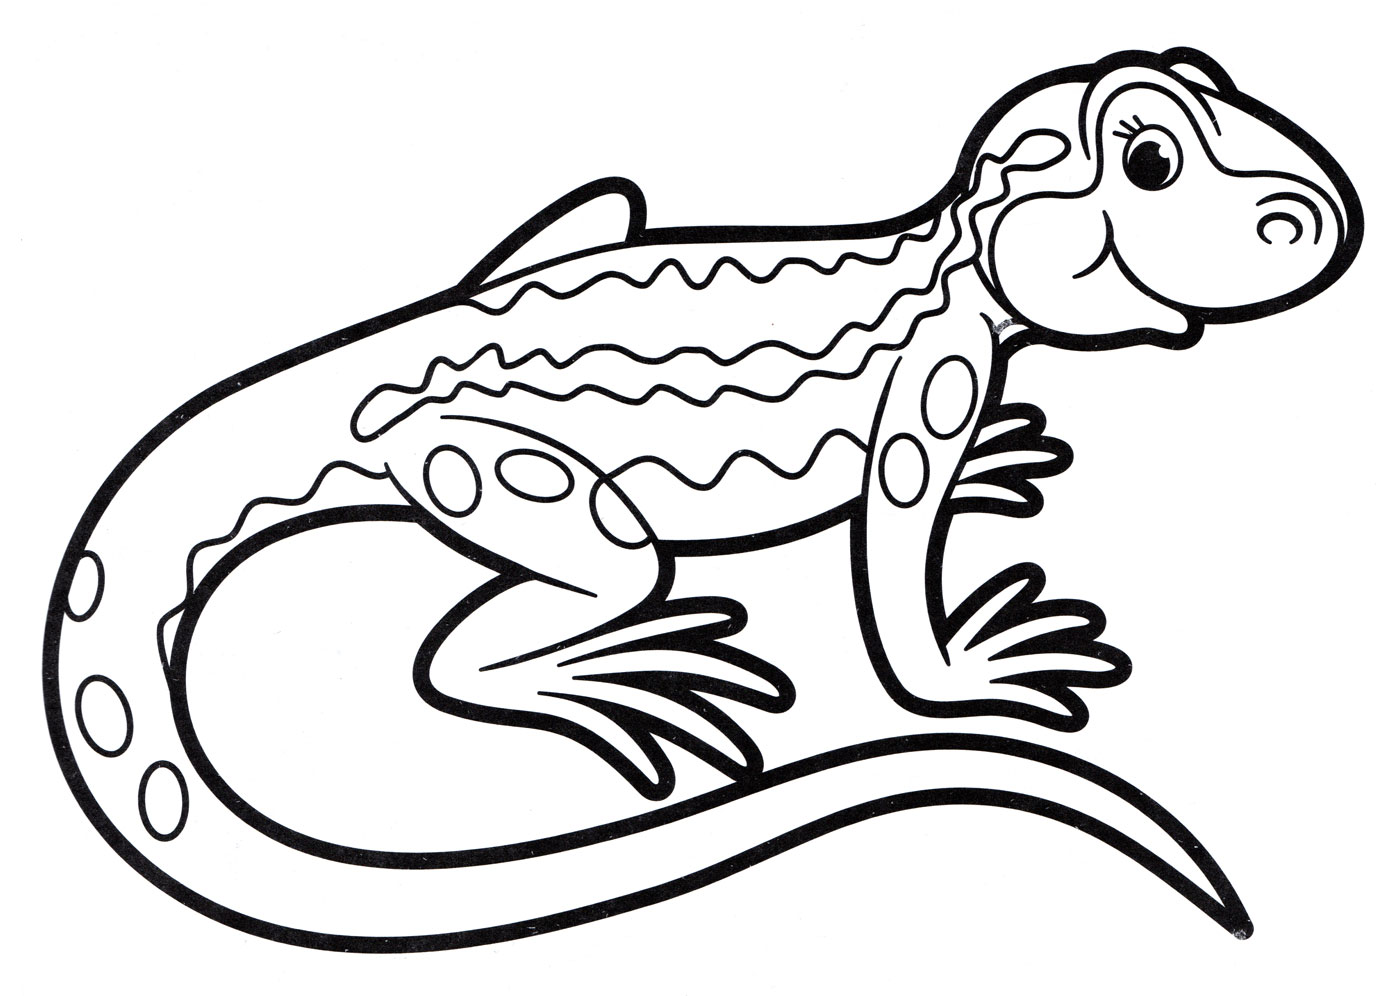 Lizard coloring page